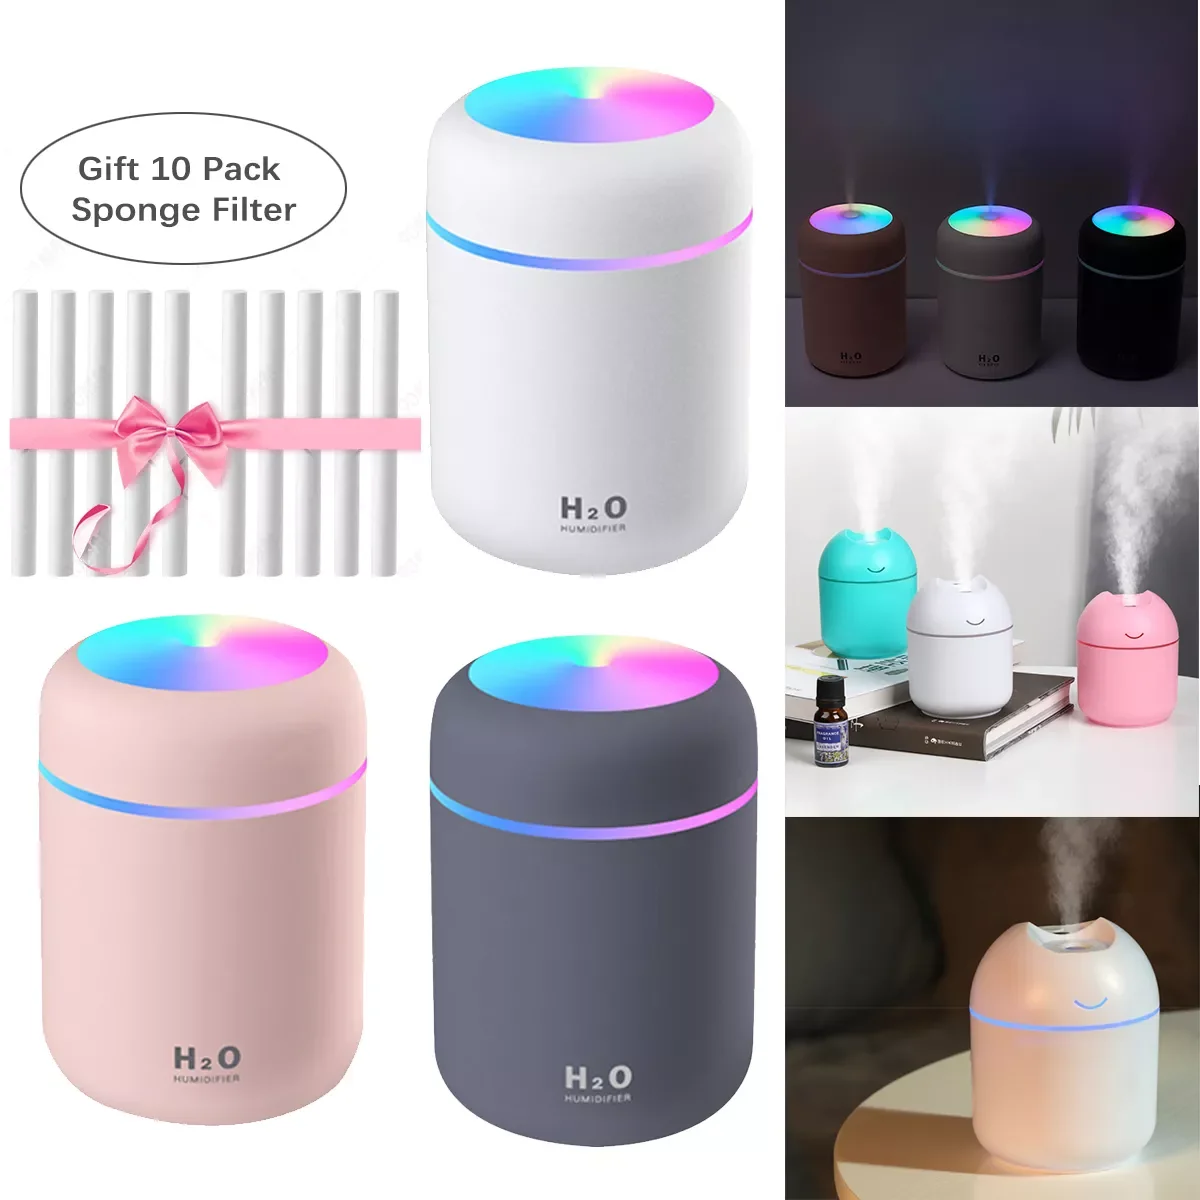 

7 Color LED Light 200ml/300ml Air Humidifier Ultrasonic Aroma Essential Oil Diffuser USB Cool Mist Maker Purifier for Car Home